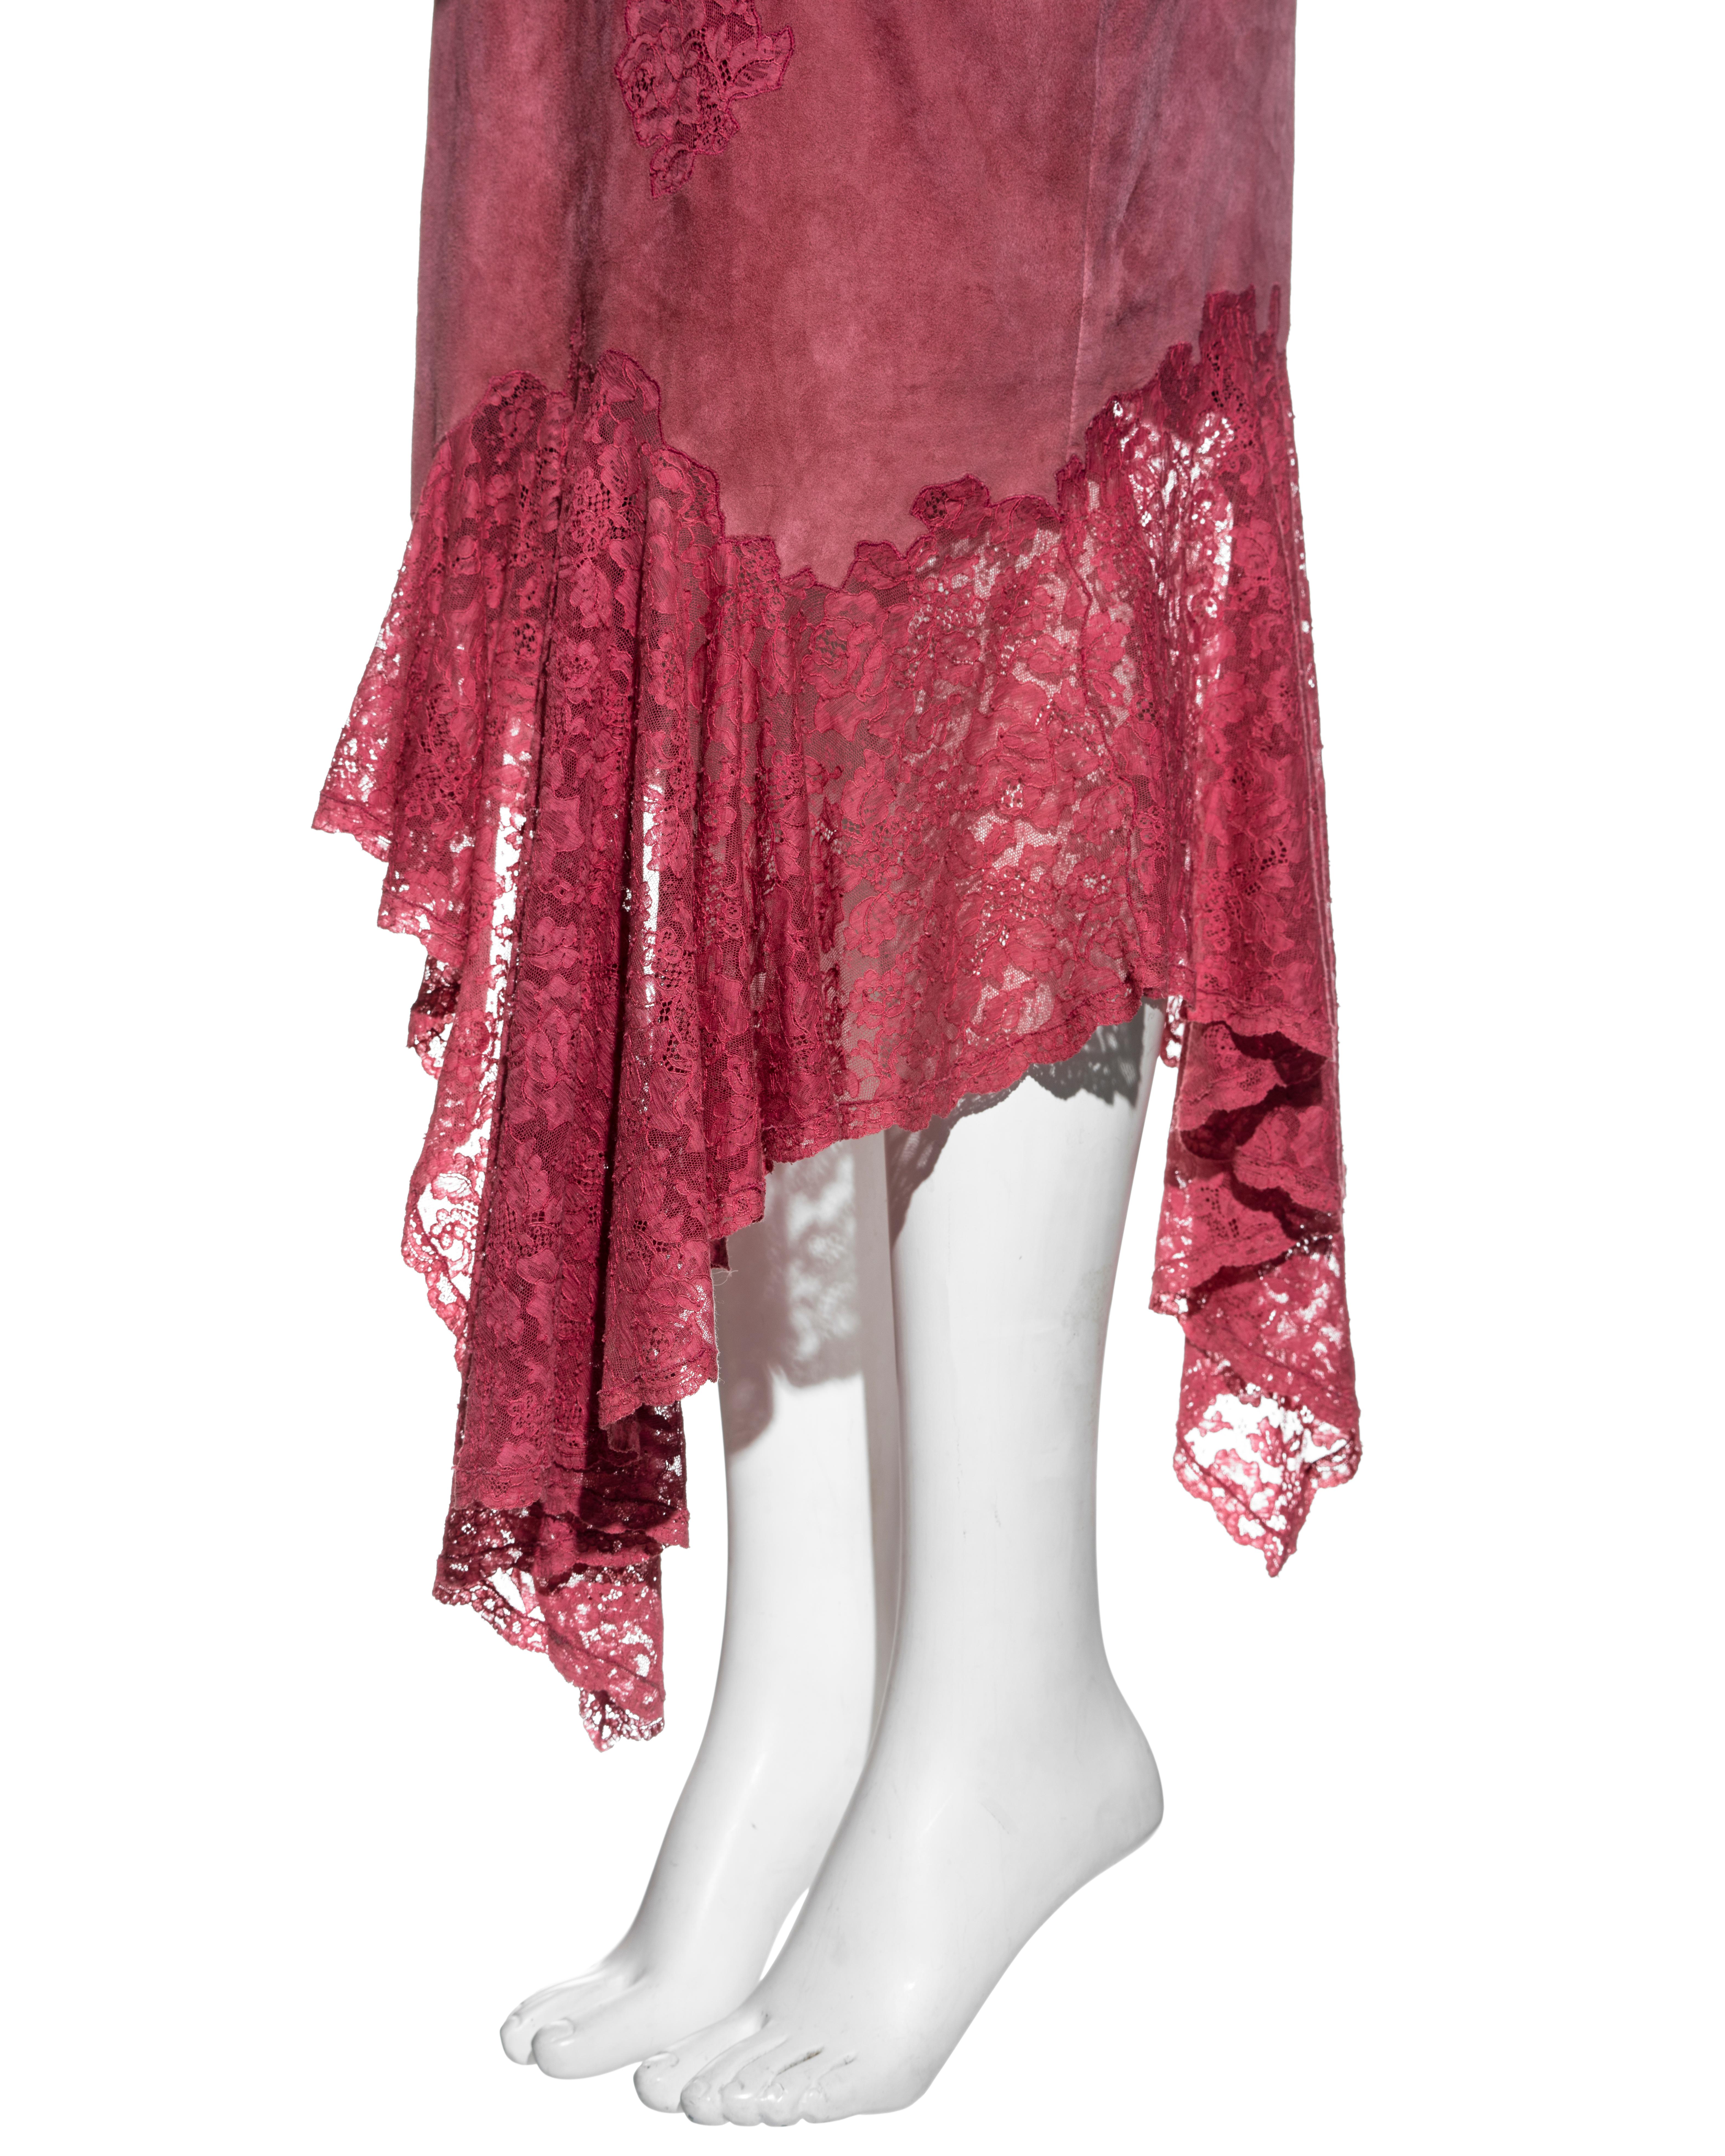 Women's Christian Dior by John Galliano pink suede and lace slip dress, fw 2000